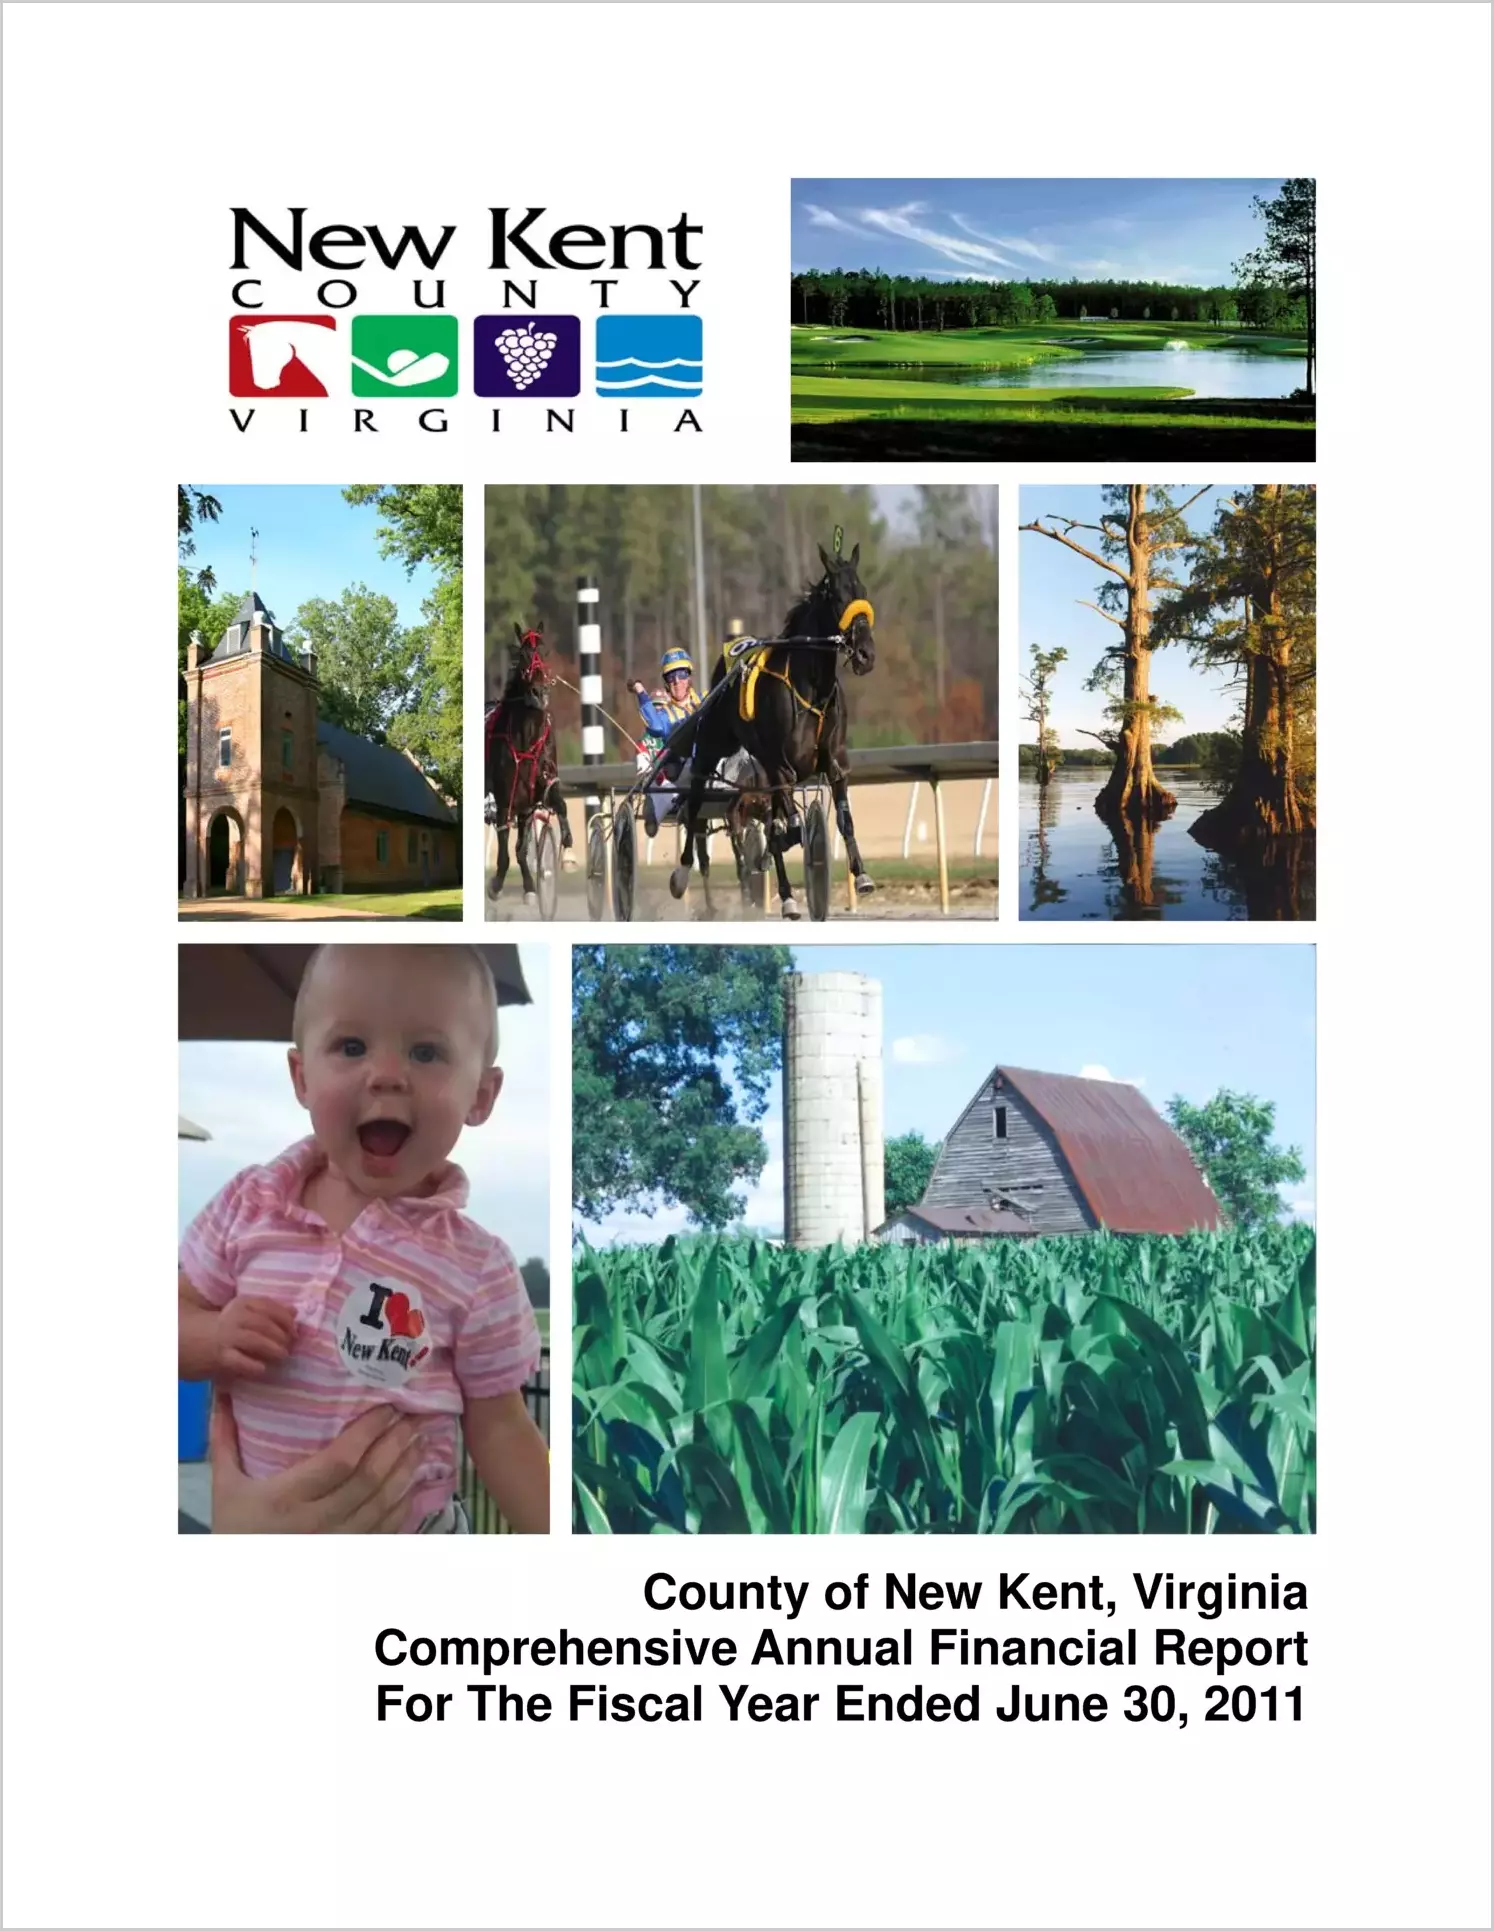 2010 Annual Financial Report for County of New Kent